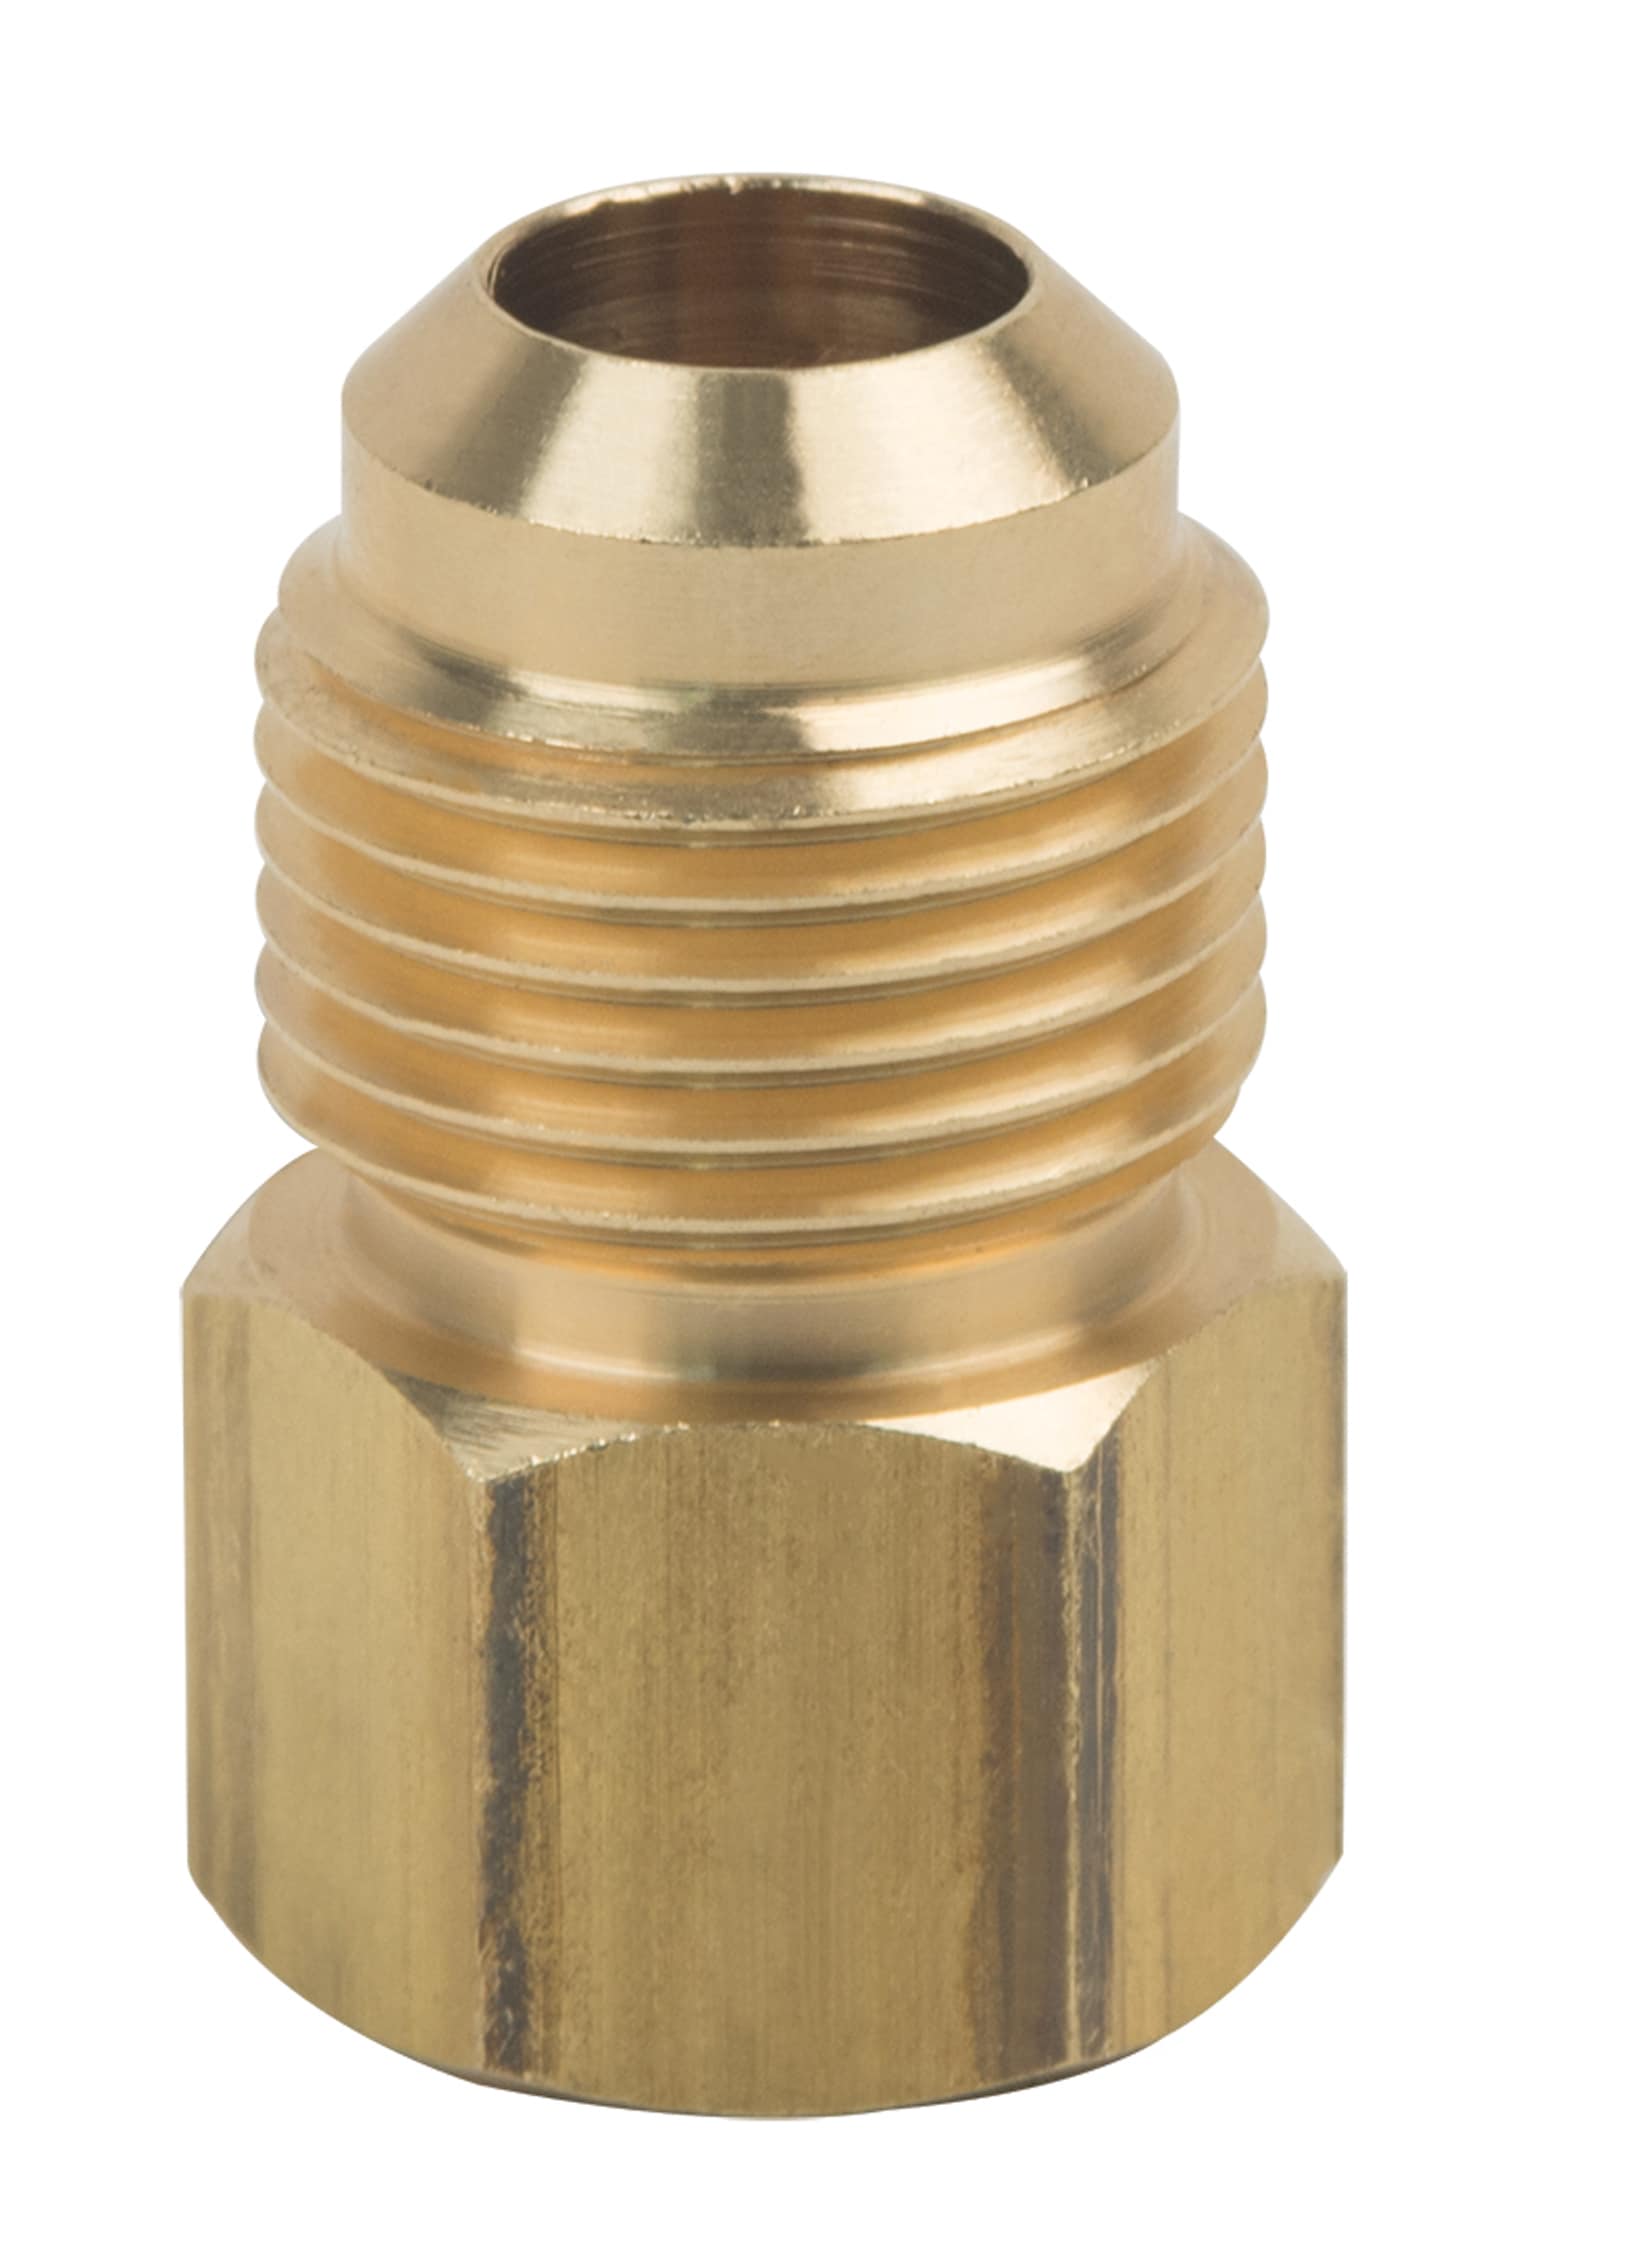 Brass Pipe 3/8" male x 1/4" male Fitting 90 degree adapter